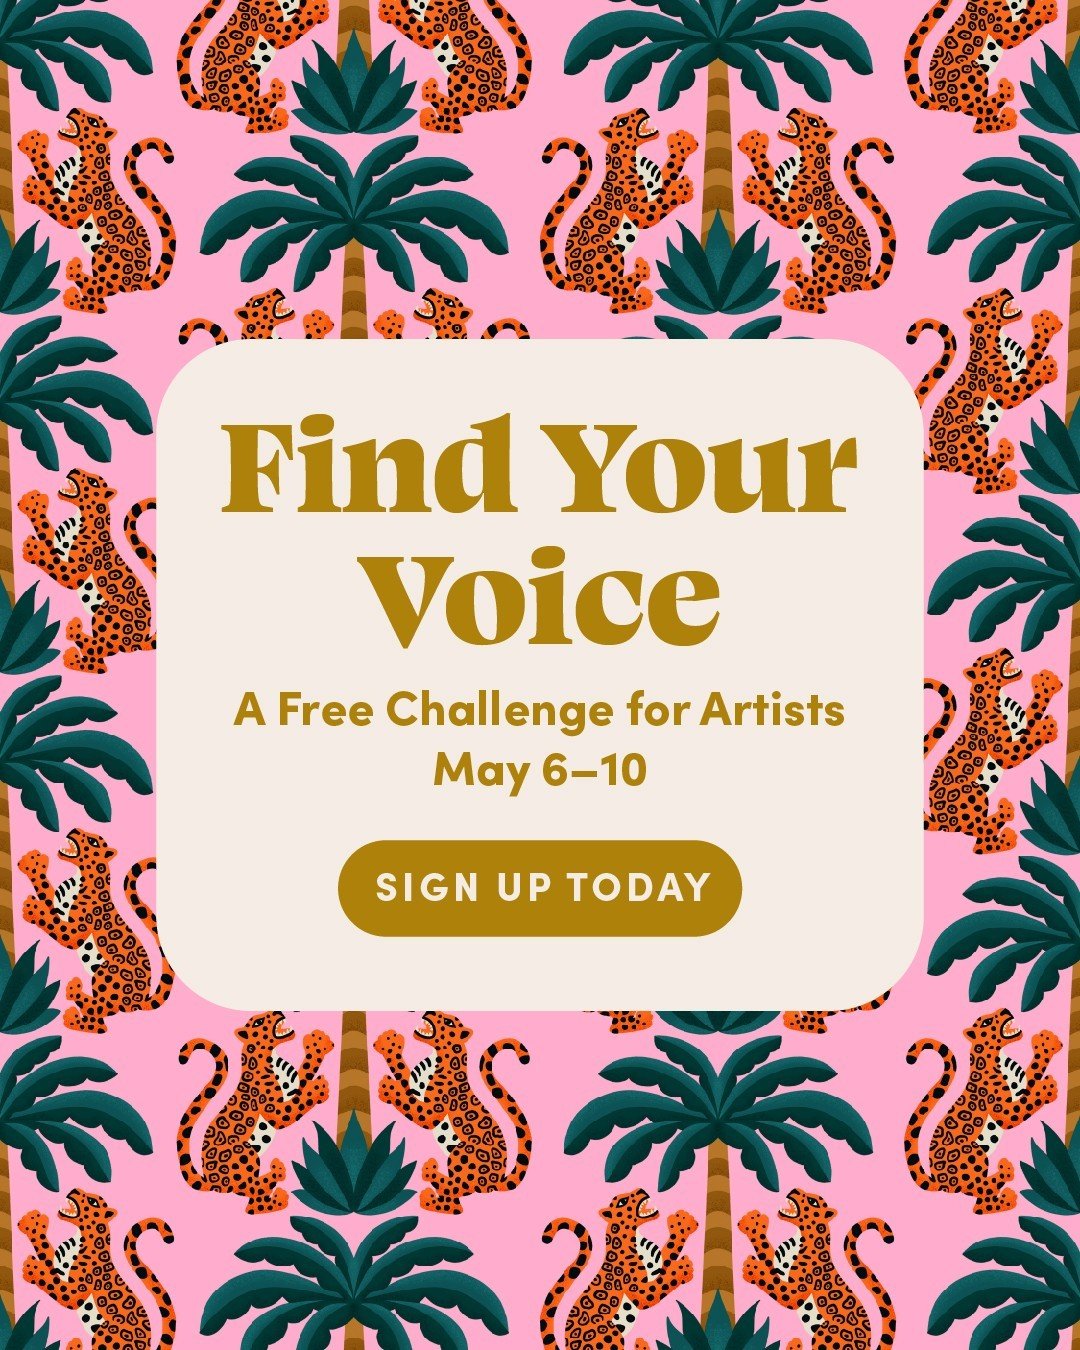 ✨ Are you ready to dive deep and find your unique artistic voice? Join my FREE 5-day #FindYourVoice Challenge starting Monday, May 6! ⁠
⁠
What you'll accomplish during this challenge includes...⁠
1️⃣ Exploring the personal experiences that shape your